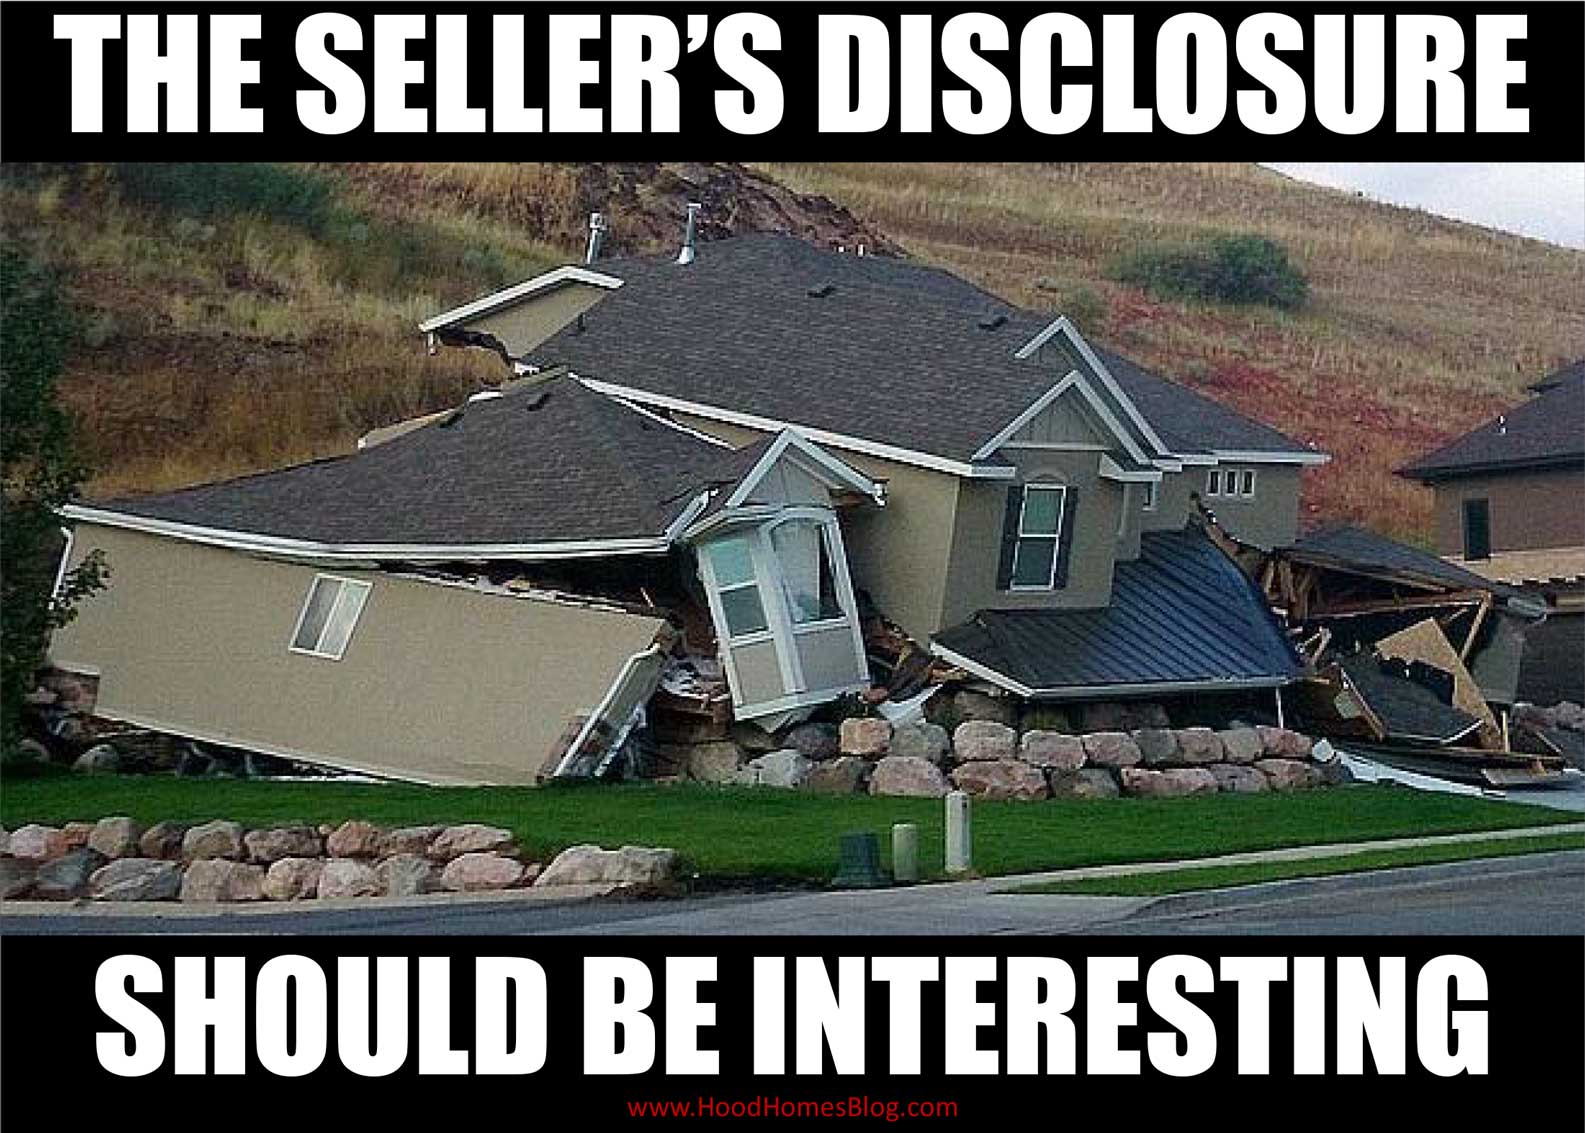 10 Blatantly Salesly Real Estate Ads That Get a Pass 'Cause They're Funny